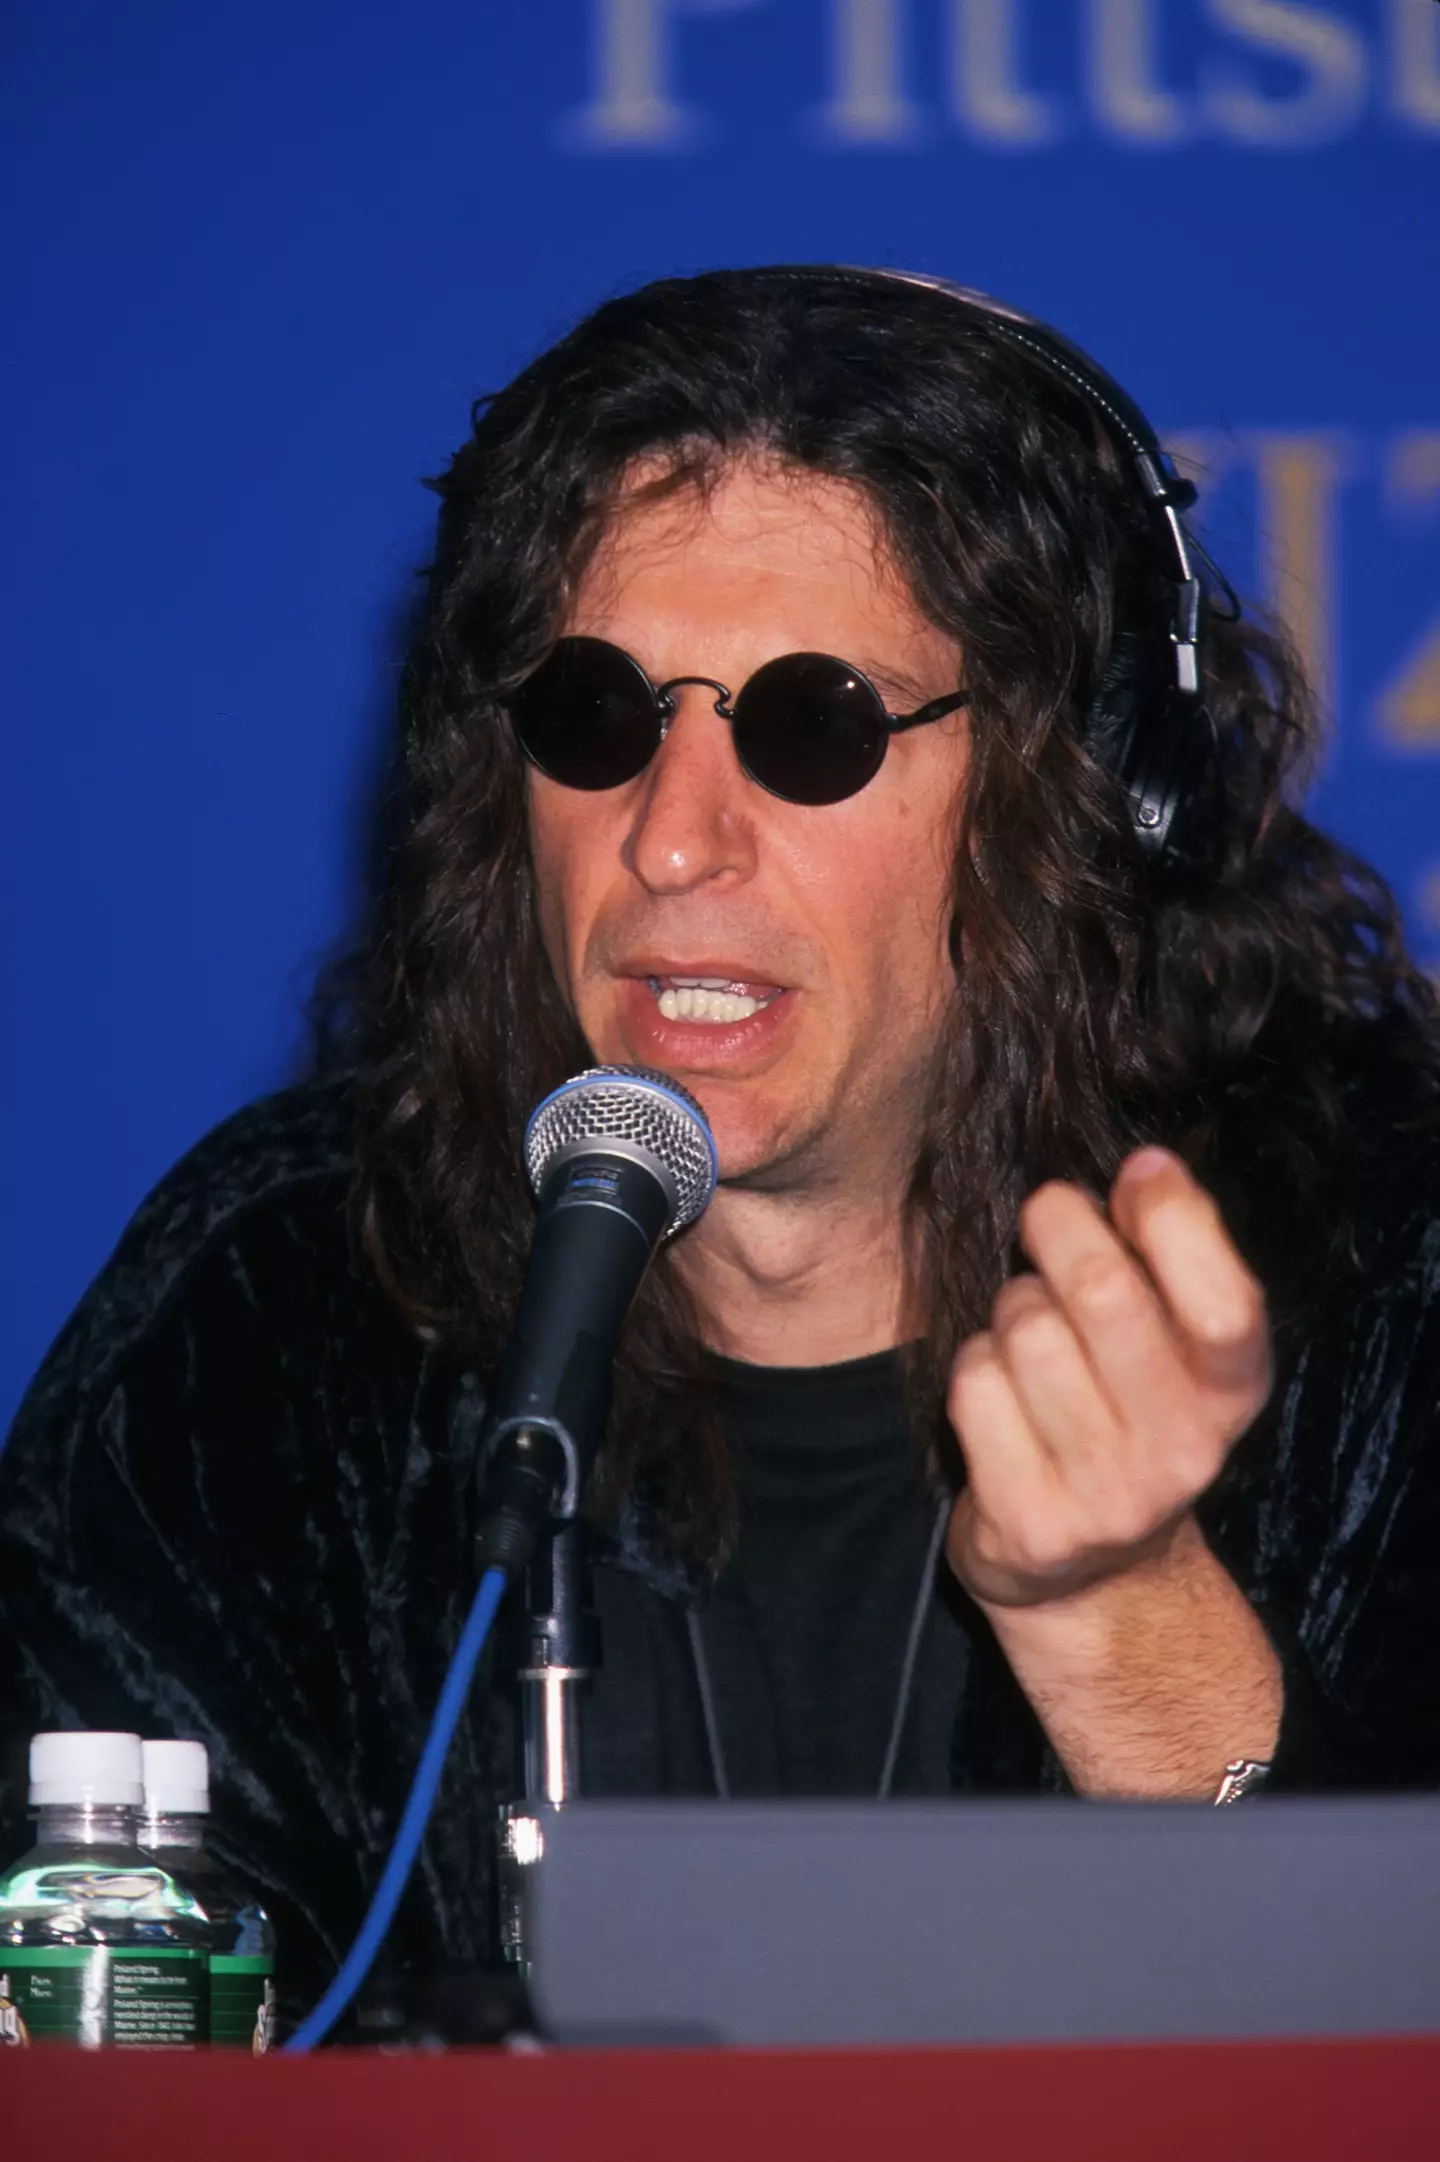 The 'serial killer' called into The Howard Stern Show. (Mitchell Gerber/Corbis/VCG via Getty Images)